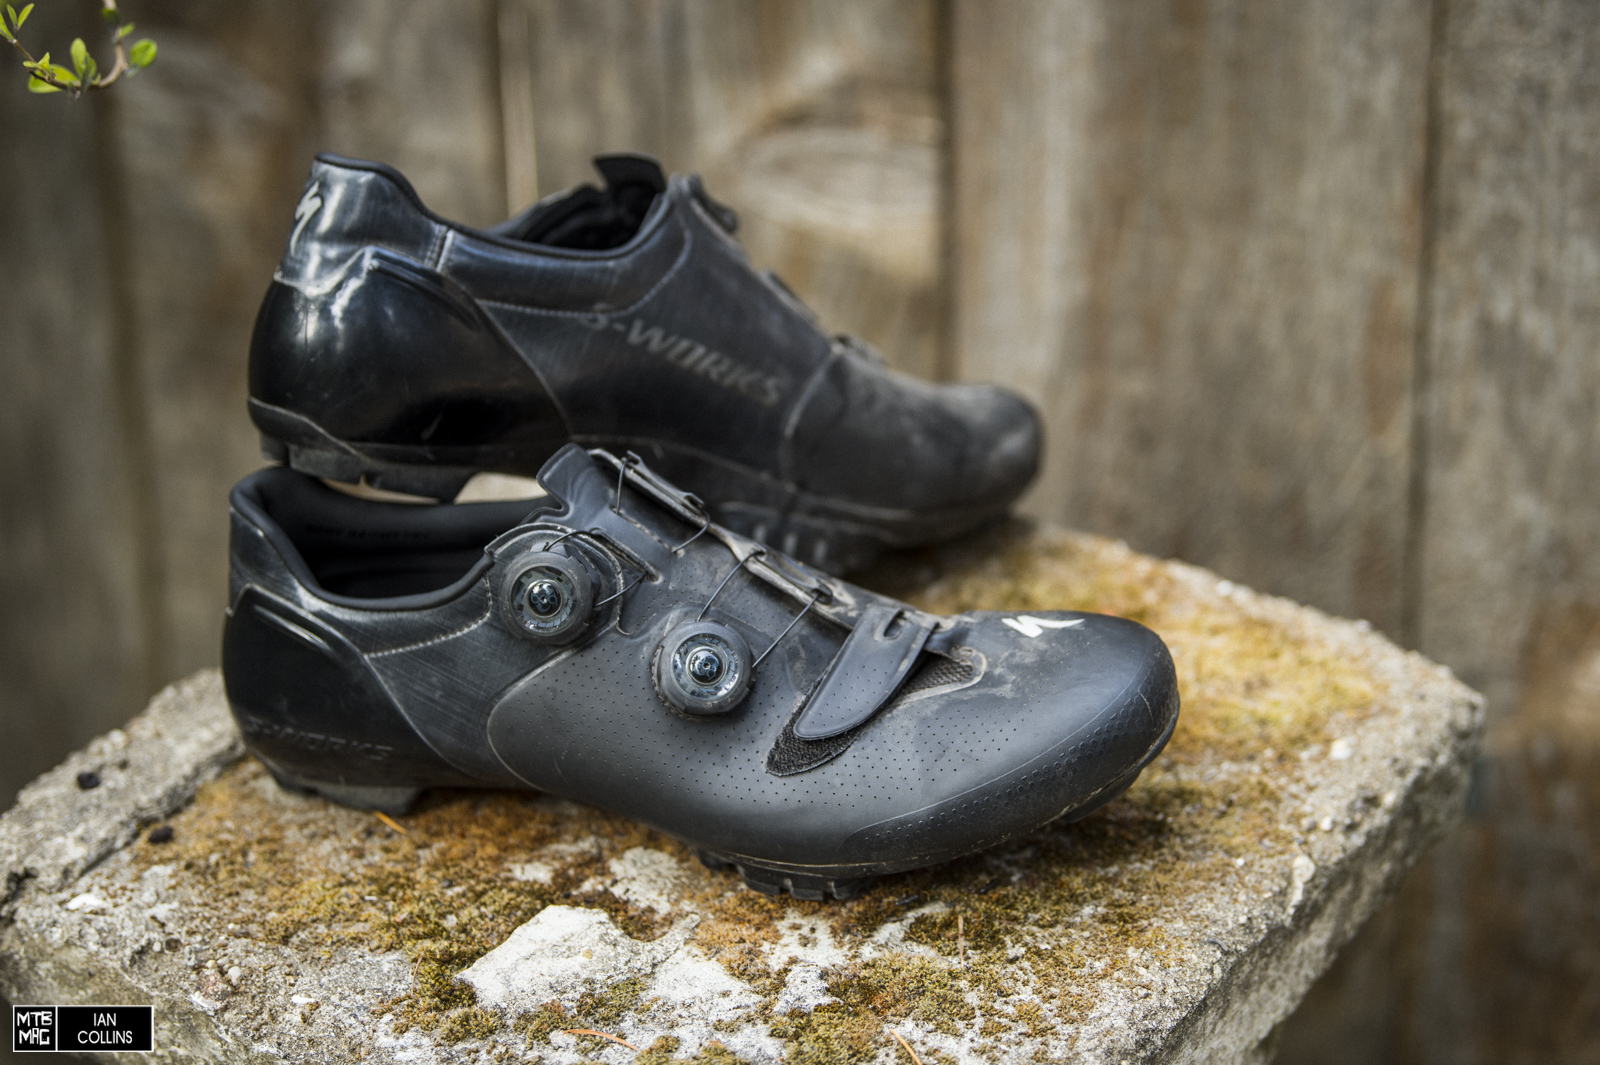 Tested] Specialized S-Works 6 XC Shoes